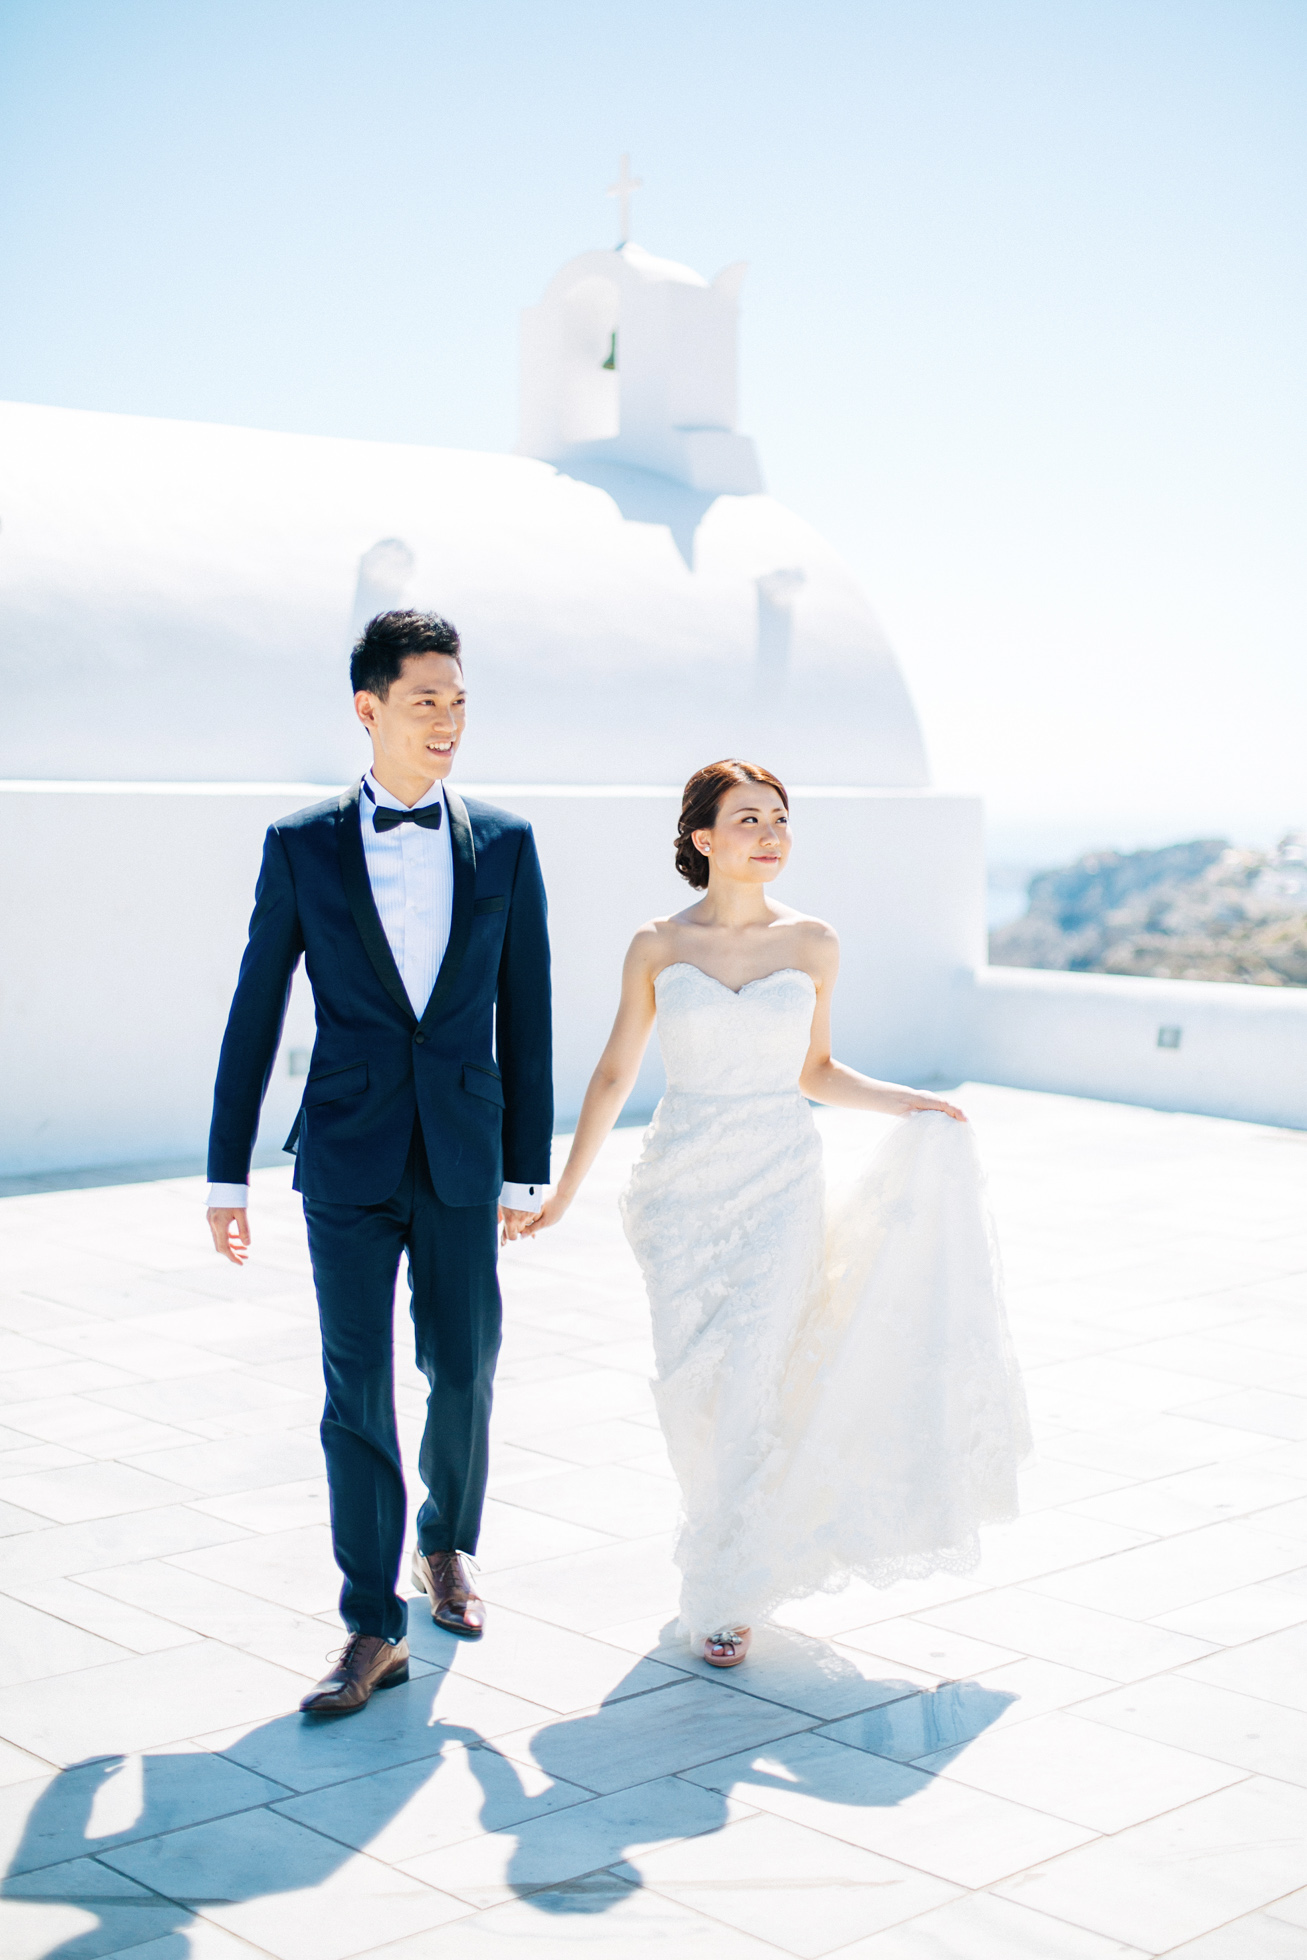 Professional Santorini wedding day photoshoot, groom and bride are walking with the picturesque background of Oia, white church, seaview and clear blue skies.